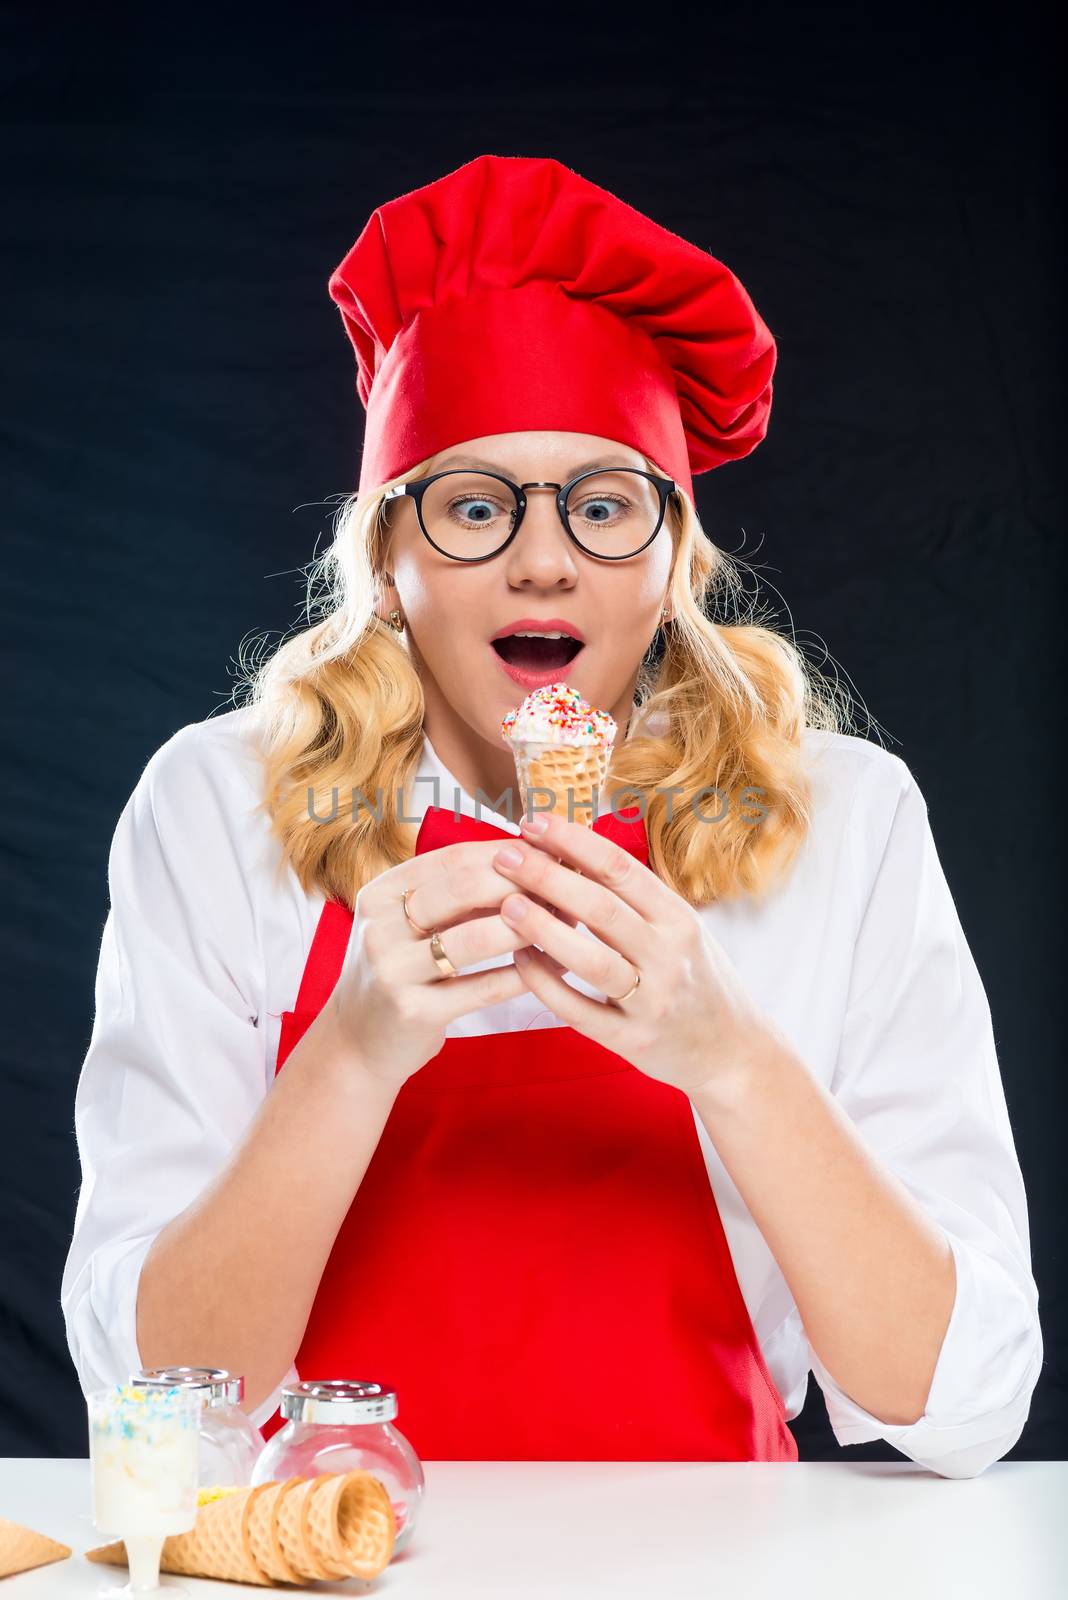 Surprised emotional chef with homemade ice cream, portrait is isolated on a black background